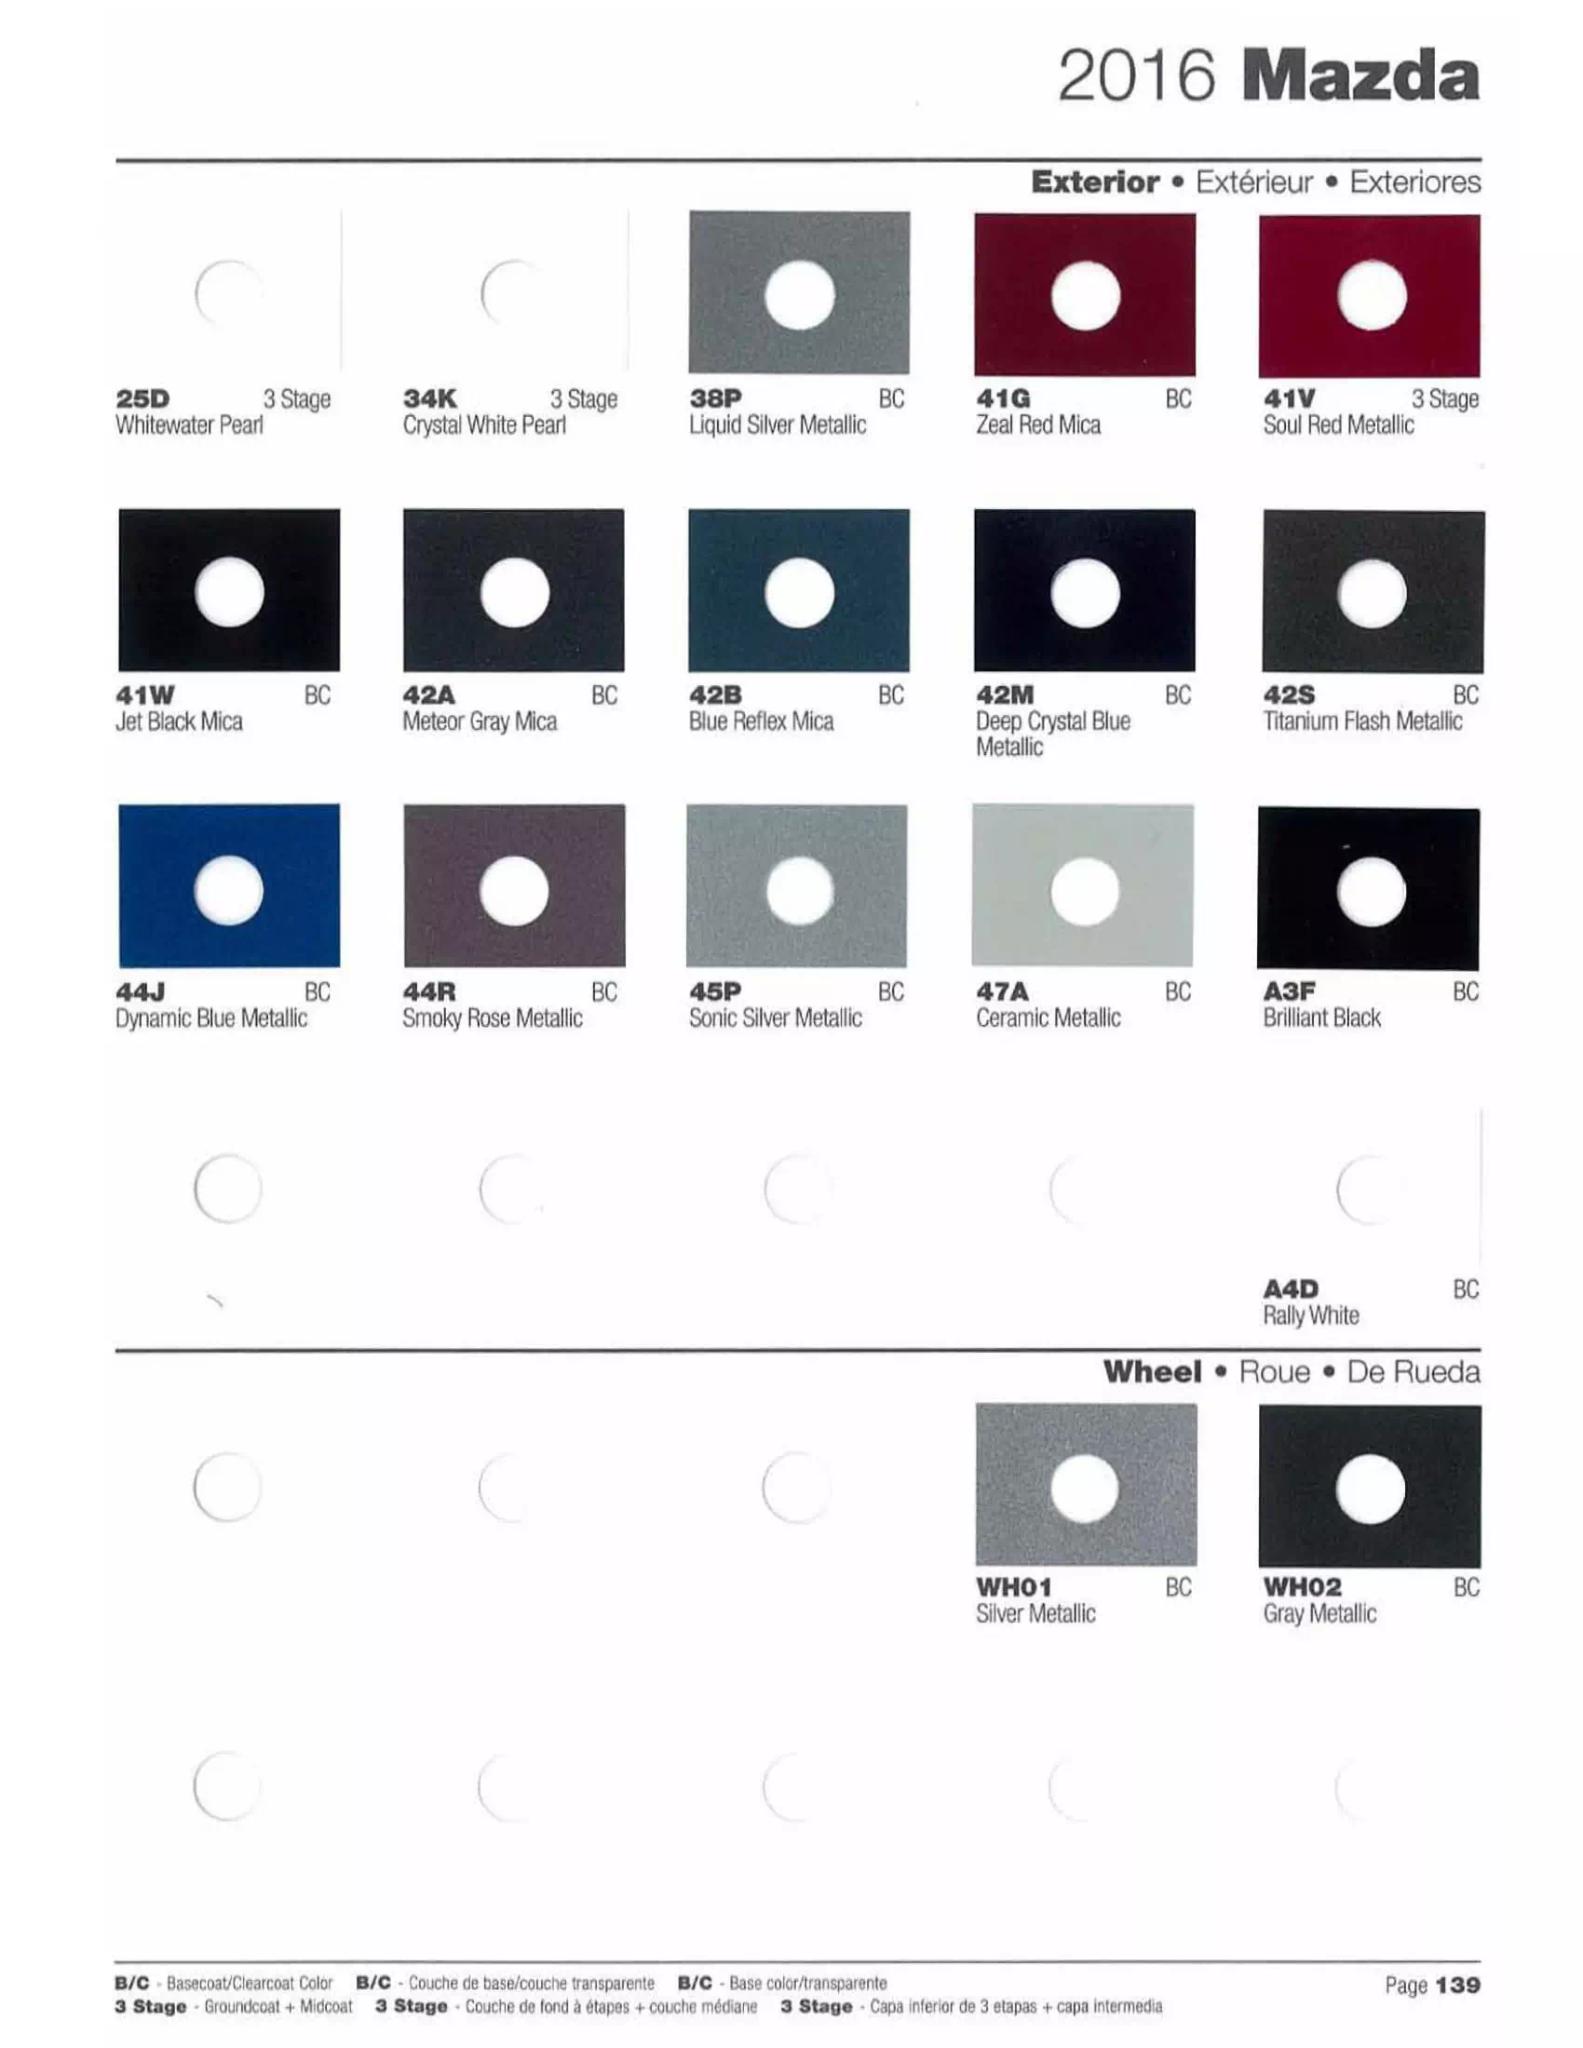 oem paint paint codes, color names, and paint swatches for all 2016 Mazda vehicles